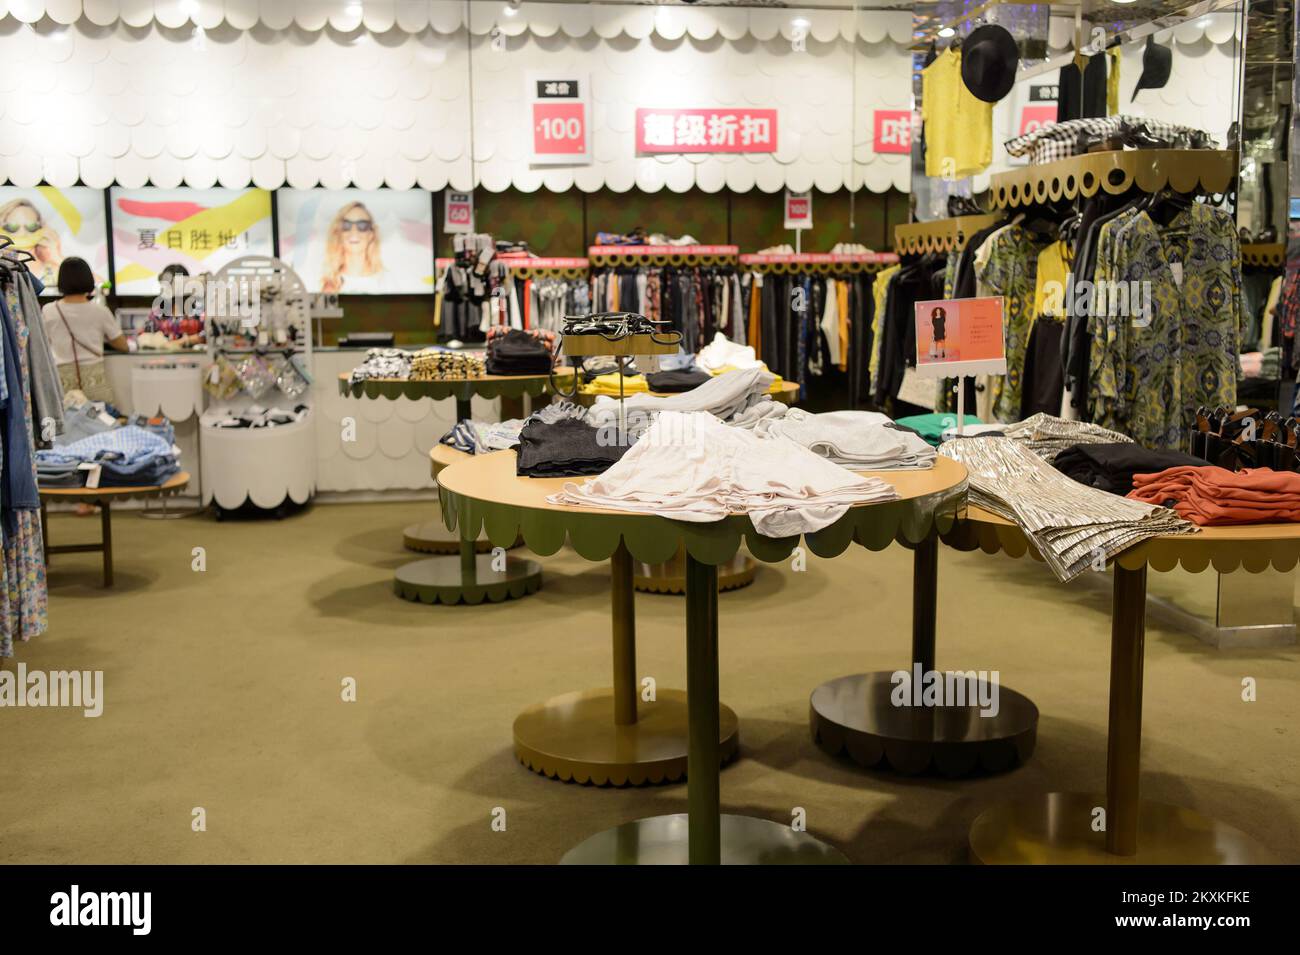 SHENZHEN, CHINA - MAY 17, 2015: shopping center interior. Shenzhen is a major city in the south of Southern China's Guangdong Province, situated immed Stock Photo